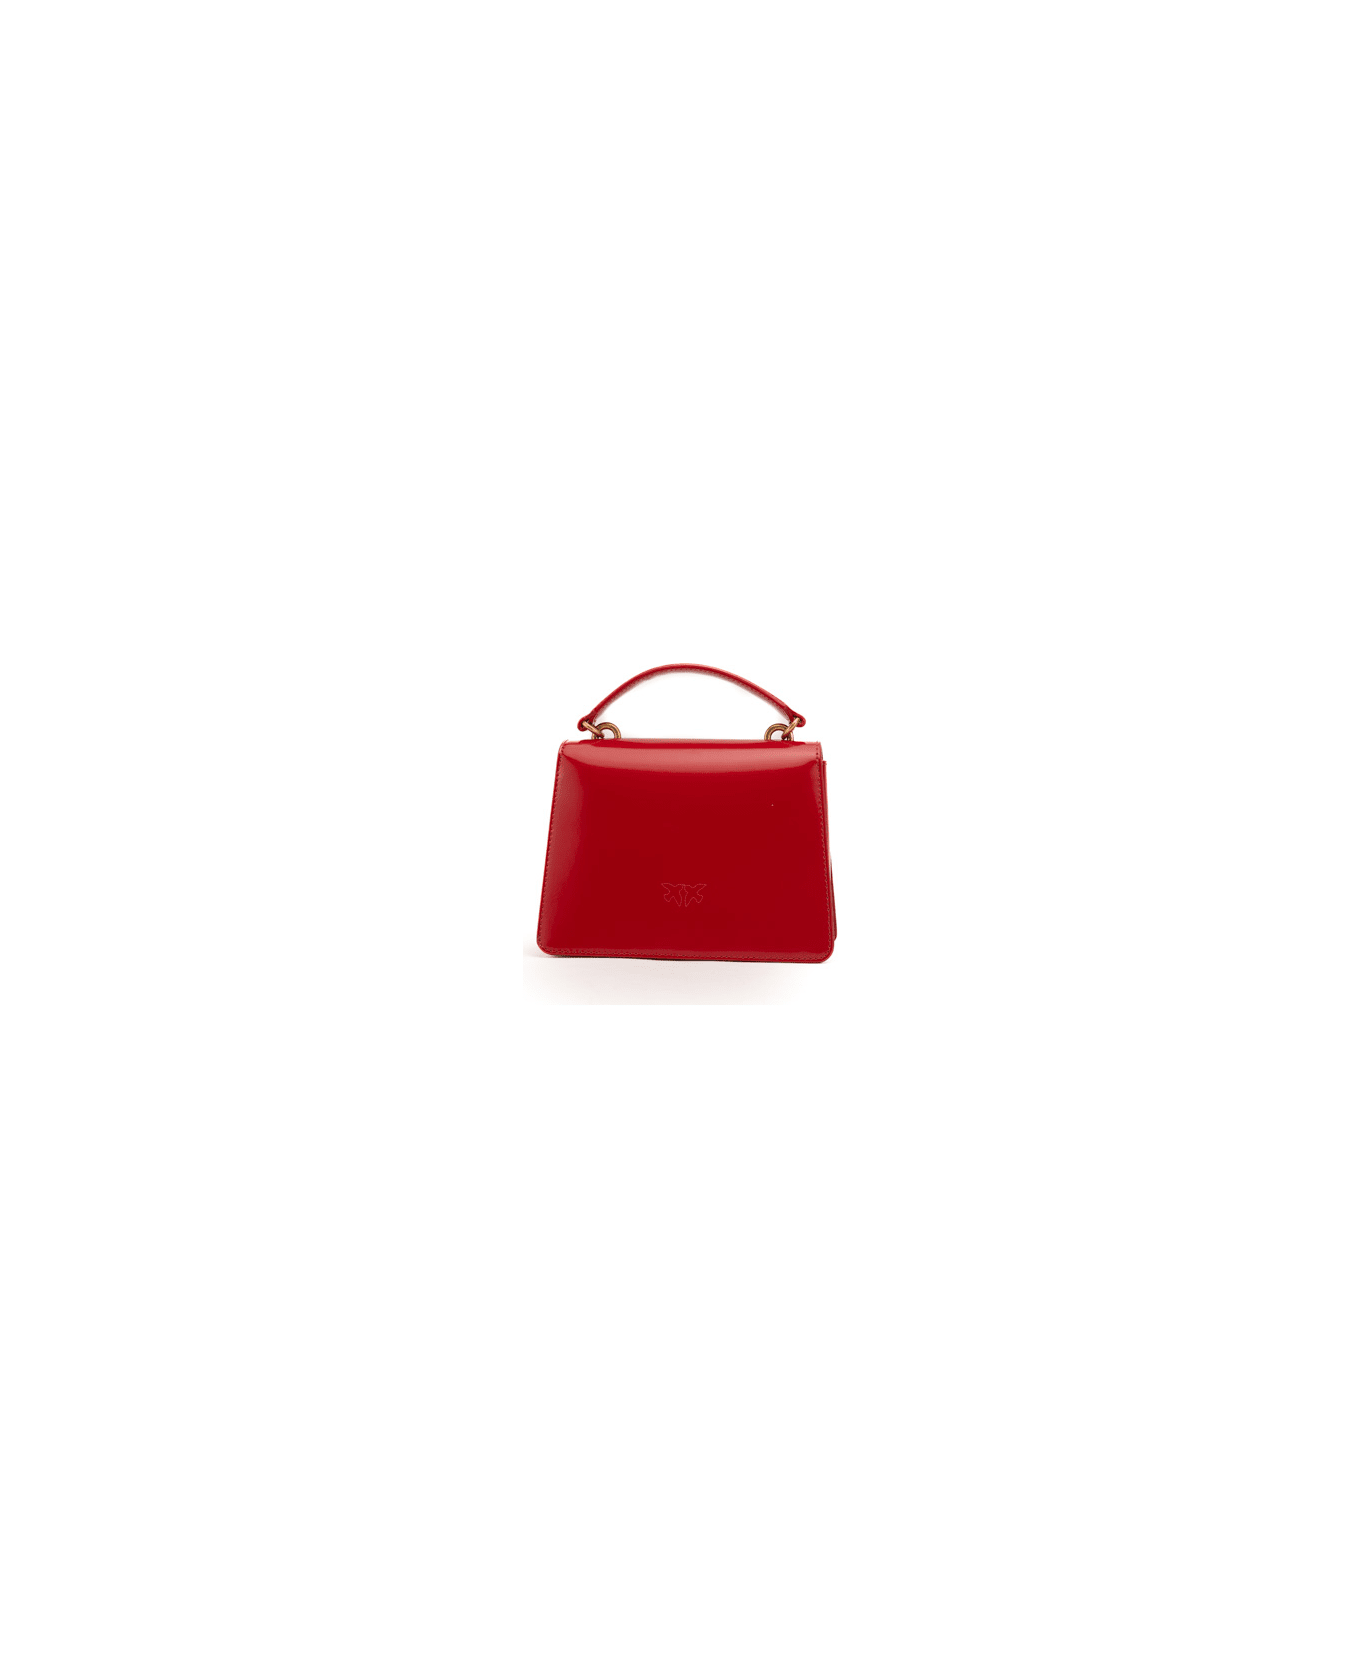 Pinko Mini Love One Top Handle Light Bag In Red Shiny Leather - Red